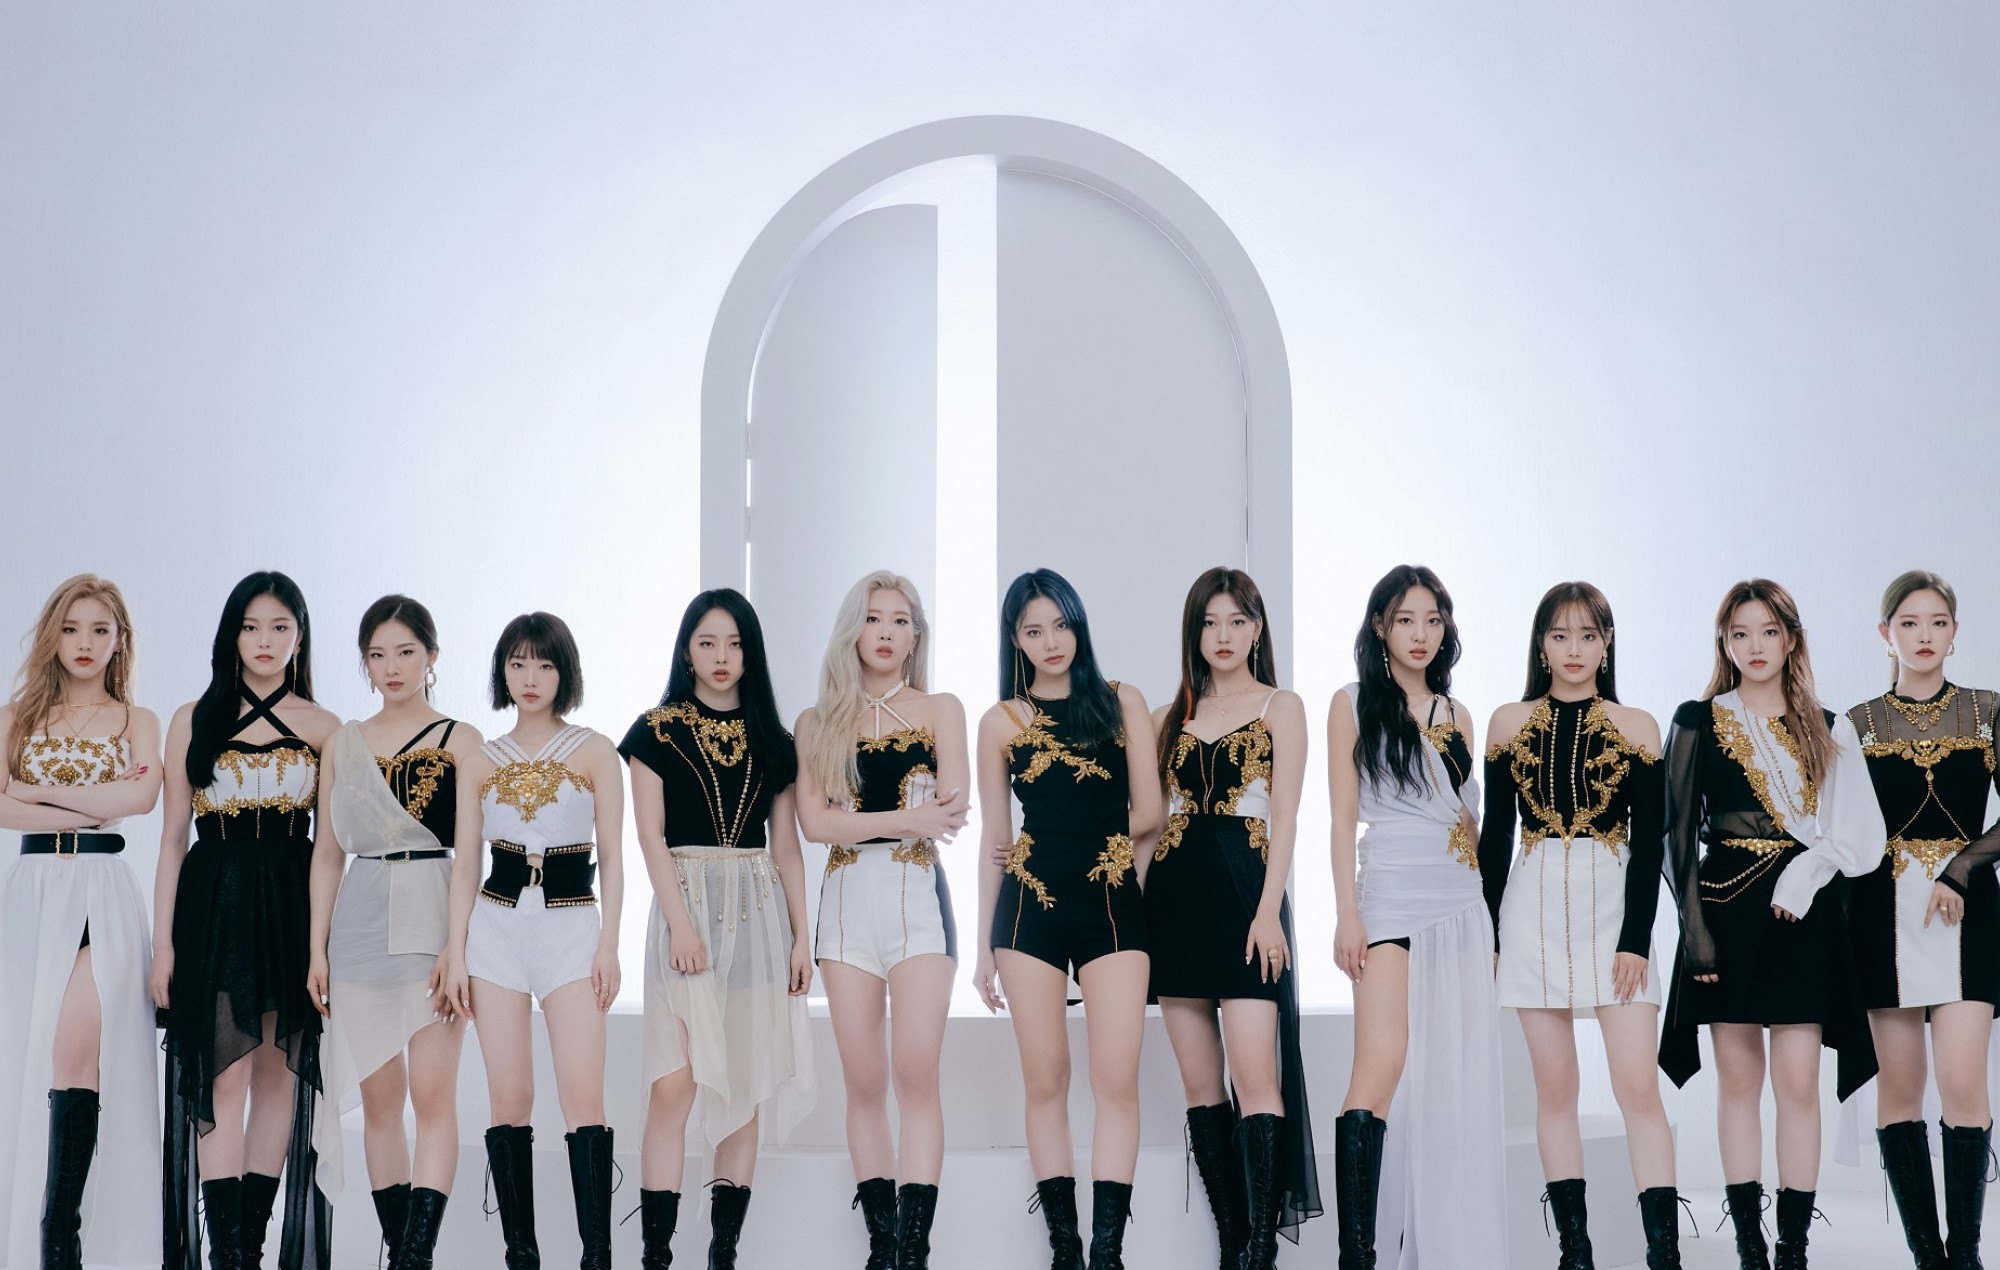 LOONA Make Their Much Anticipated Return With 'PTT (Paint The Town)'